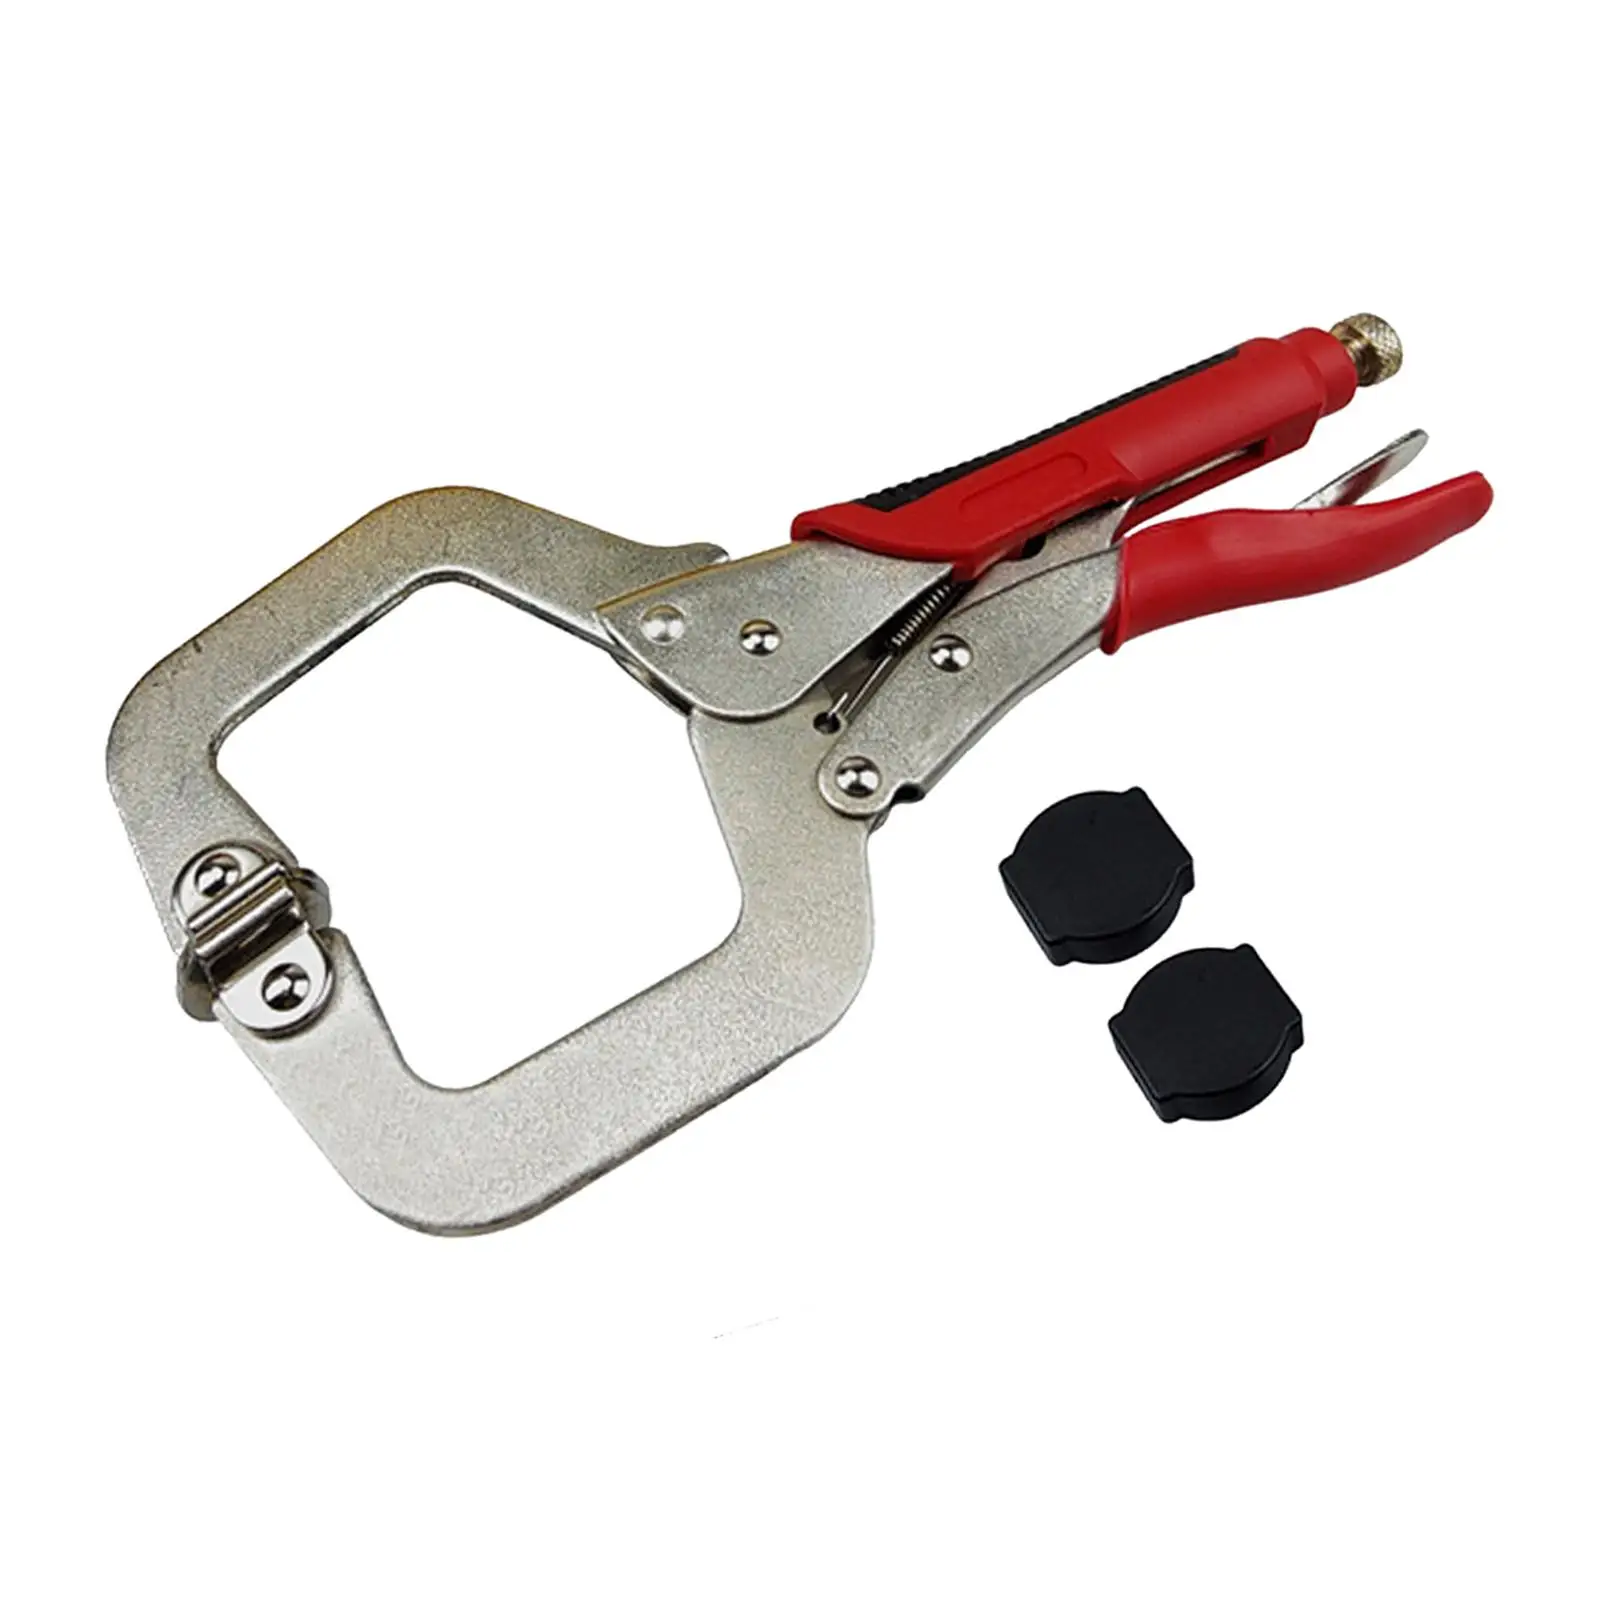 Welding Clamps Heavy Duty Wood Tools Welding vise grips Pliers for Cabinet